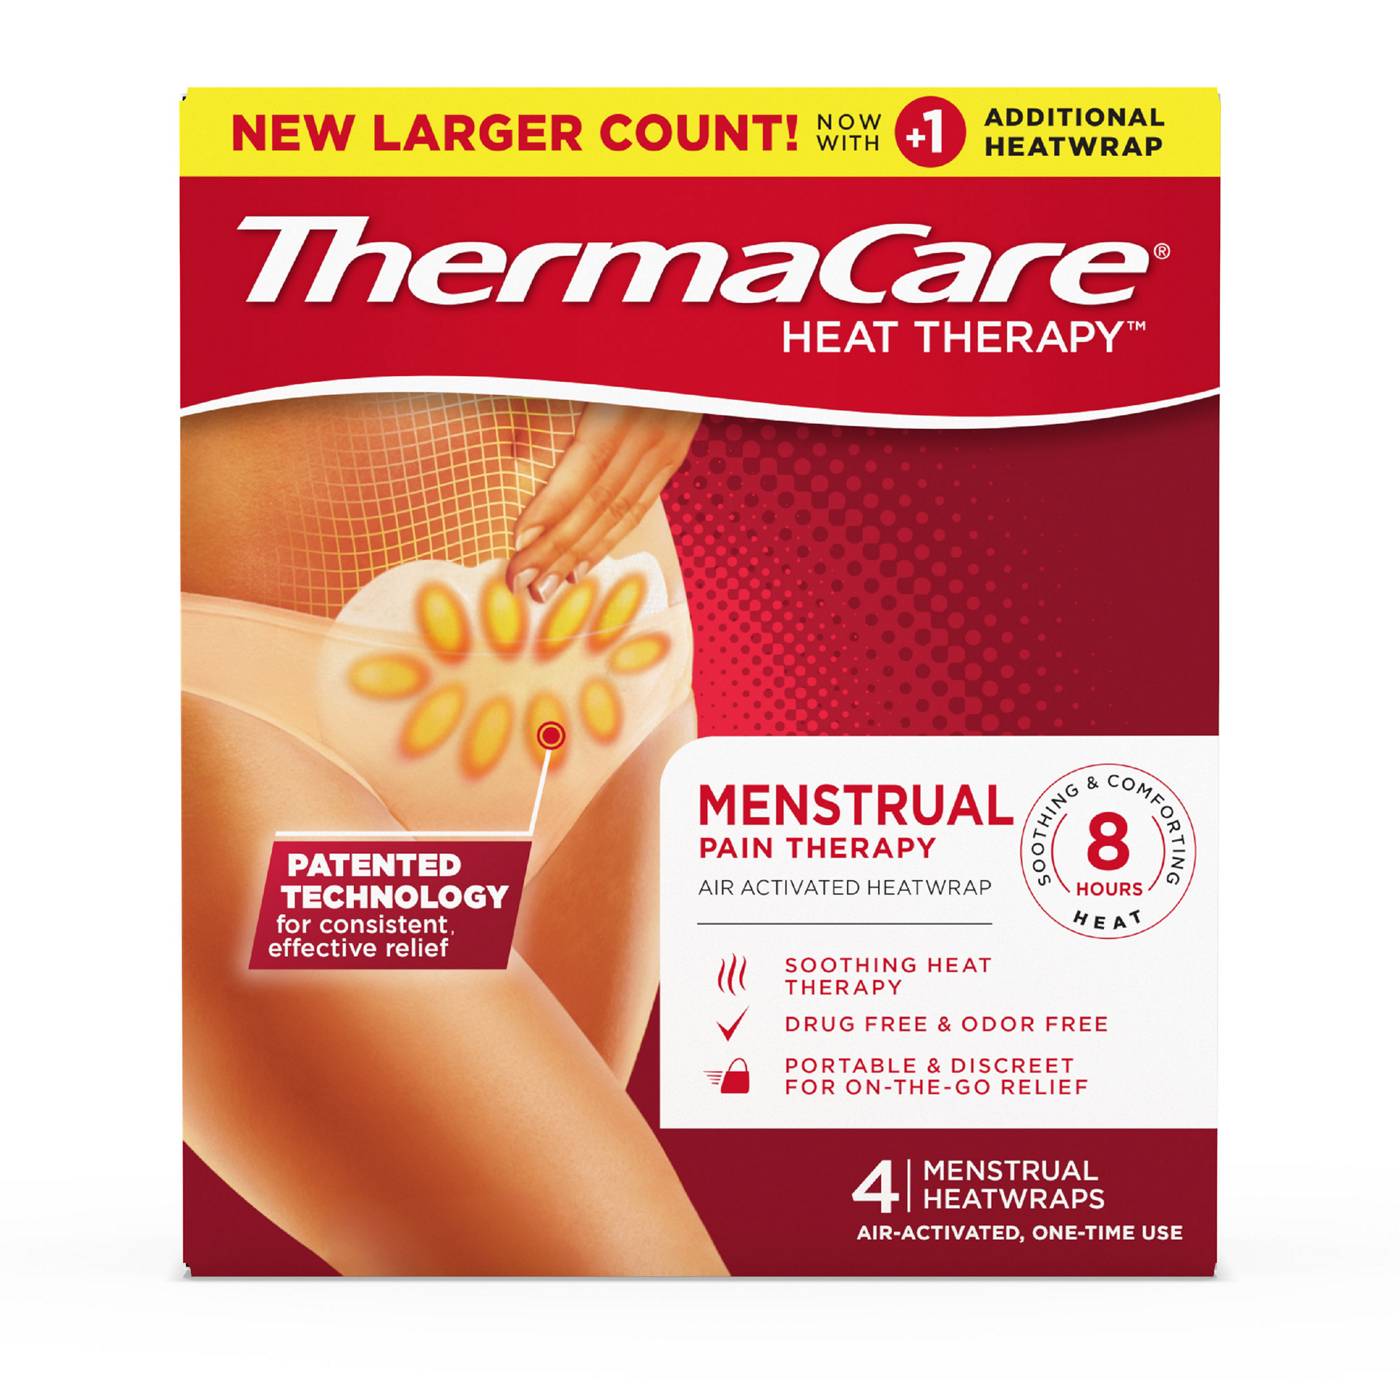 ThermaCare Menstrual Pain Therapy Heatwrap; image 1 of 3